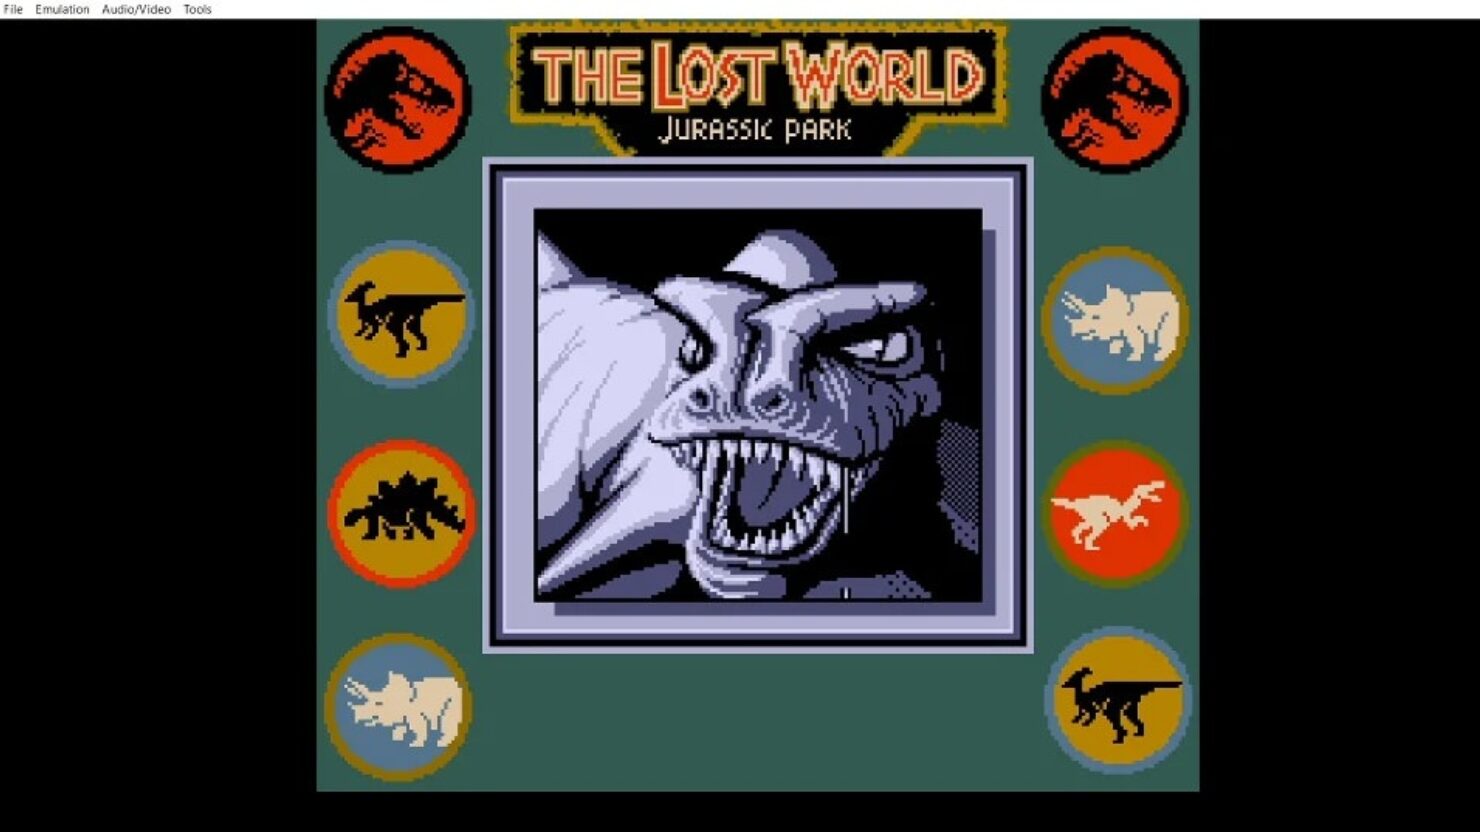 Play it Again - The Lost World Jurassic Park